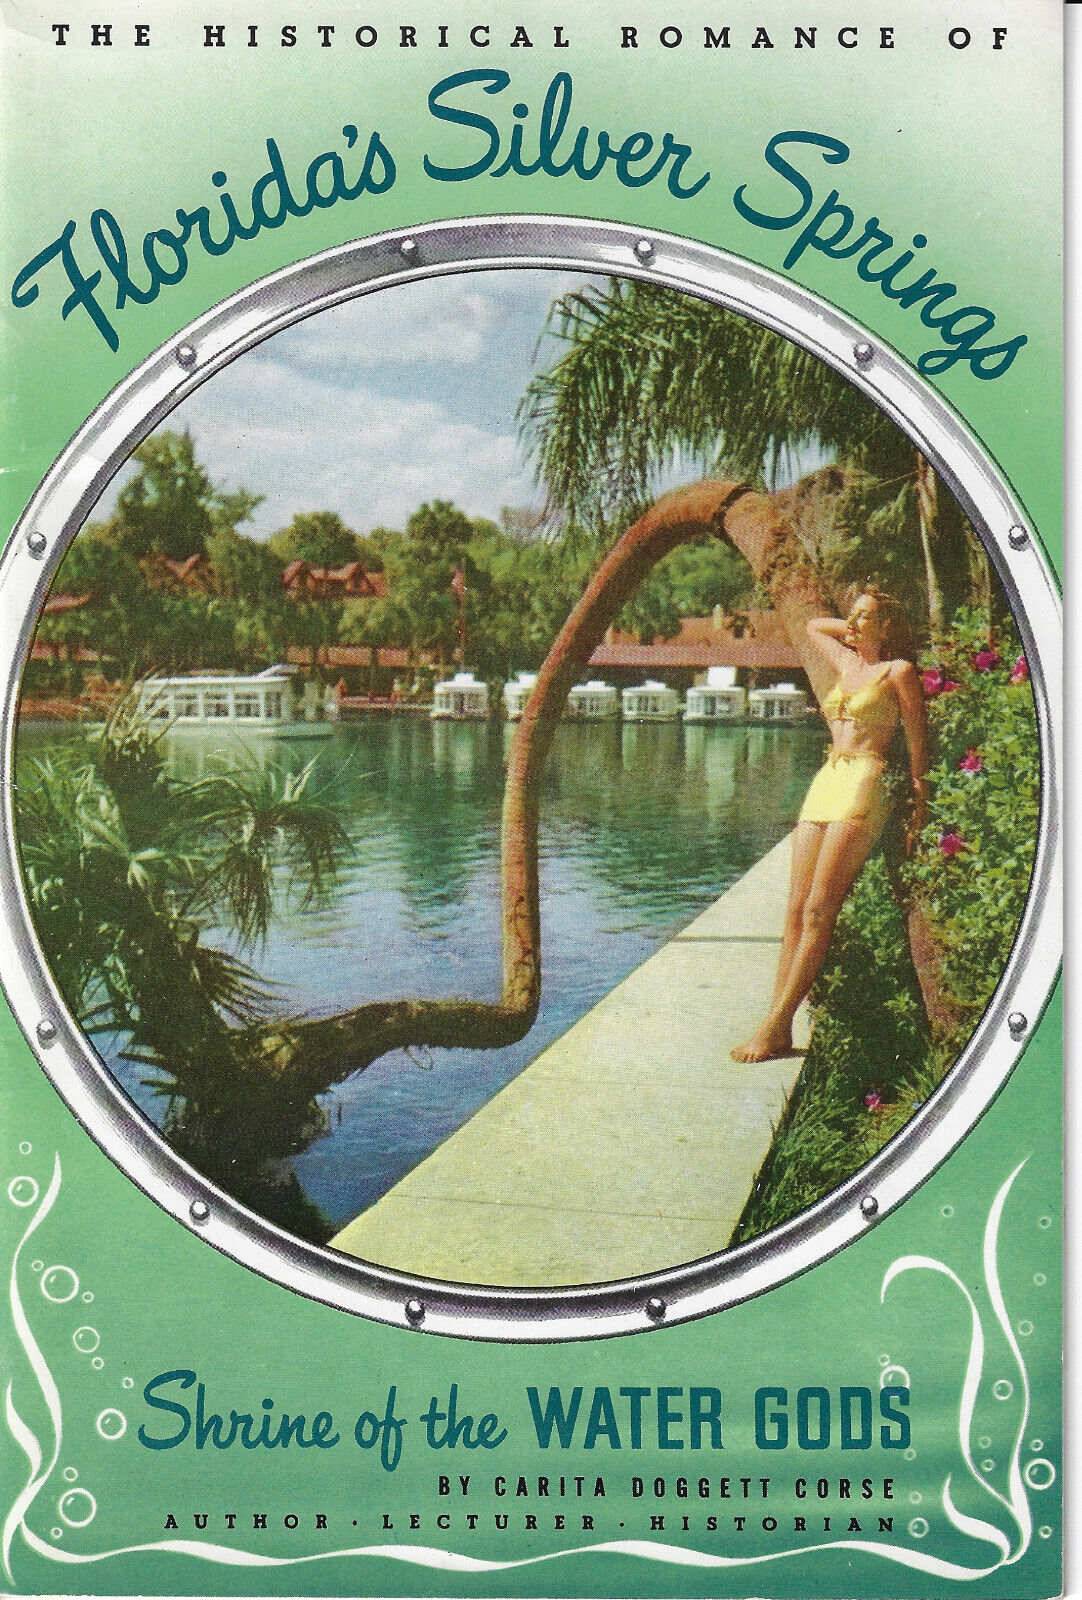 CA 1950s BOOKLET FOR FLORIDA'S SILVER SPRINGS